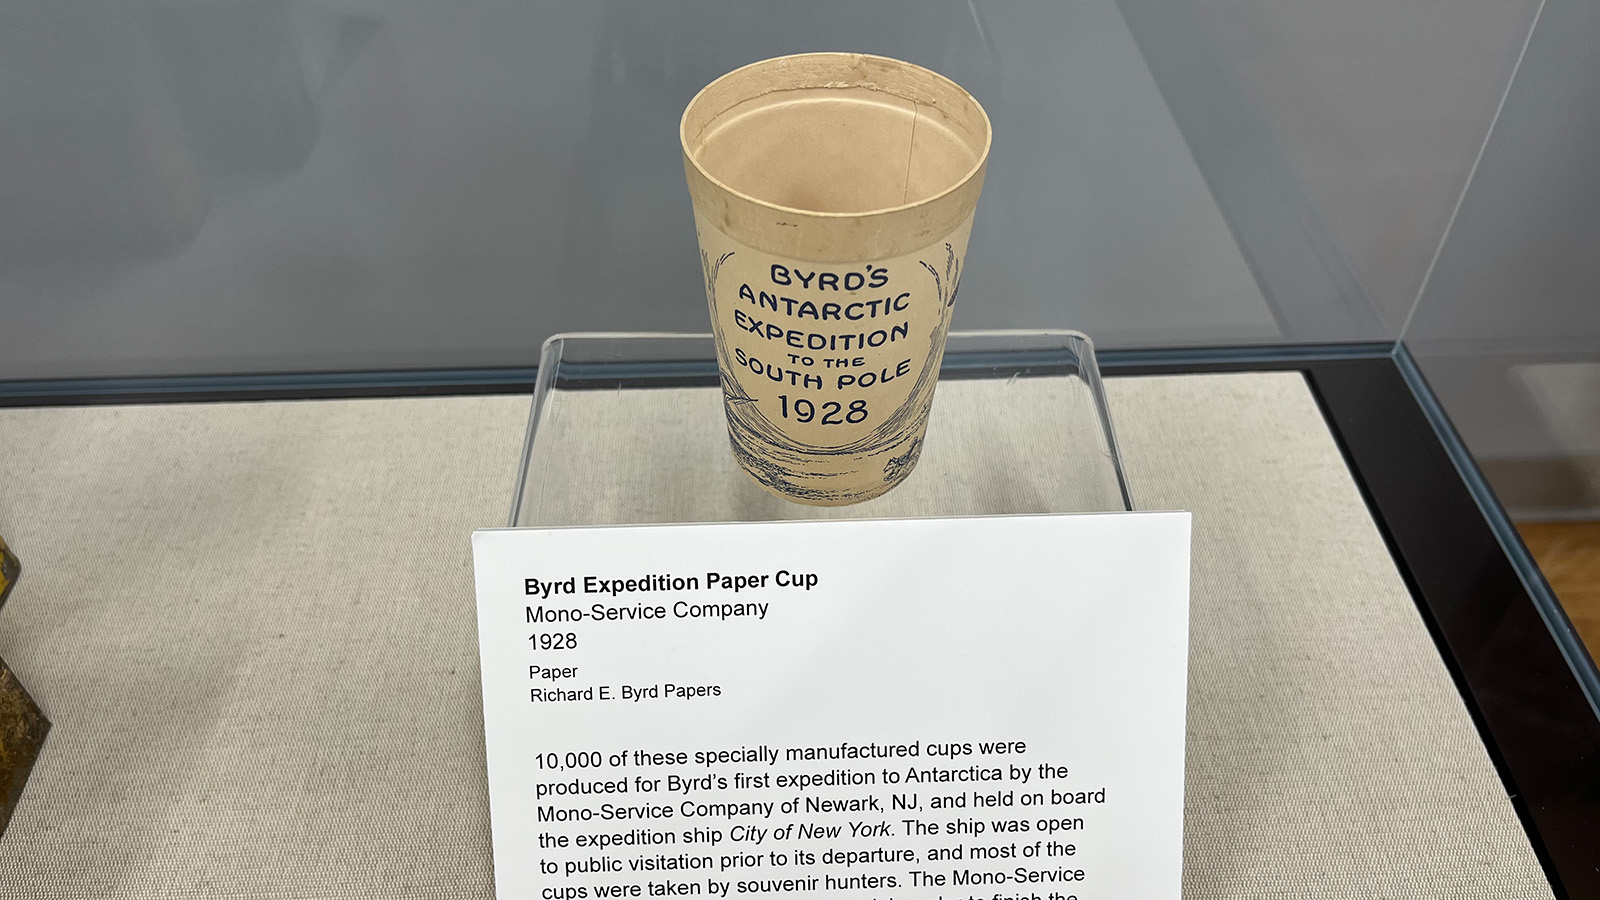 Byrd expedition paper cup